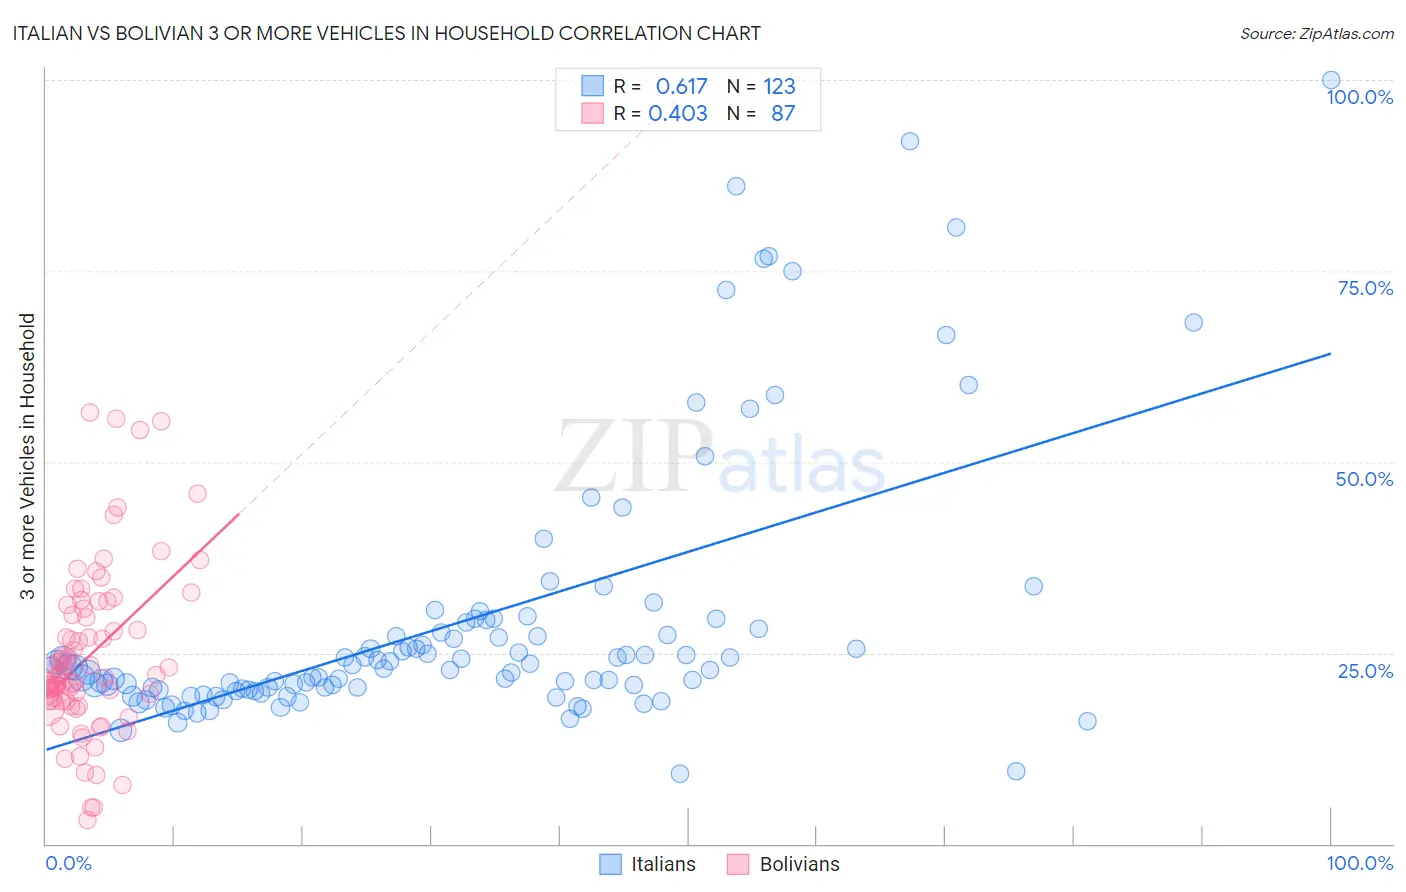 Italian vs Bolivian 3 or more Vehicles in Household